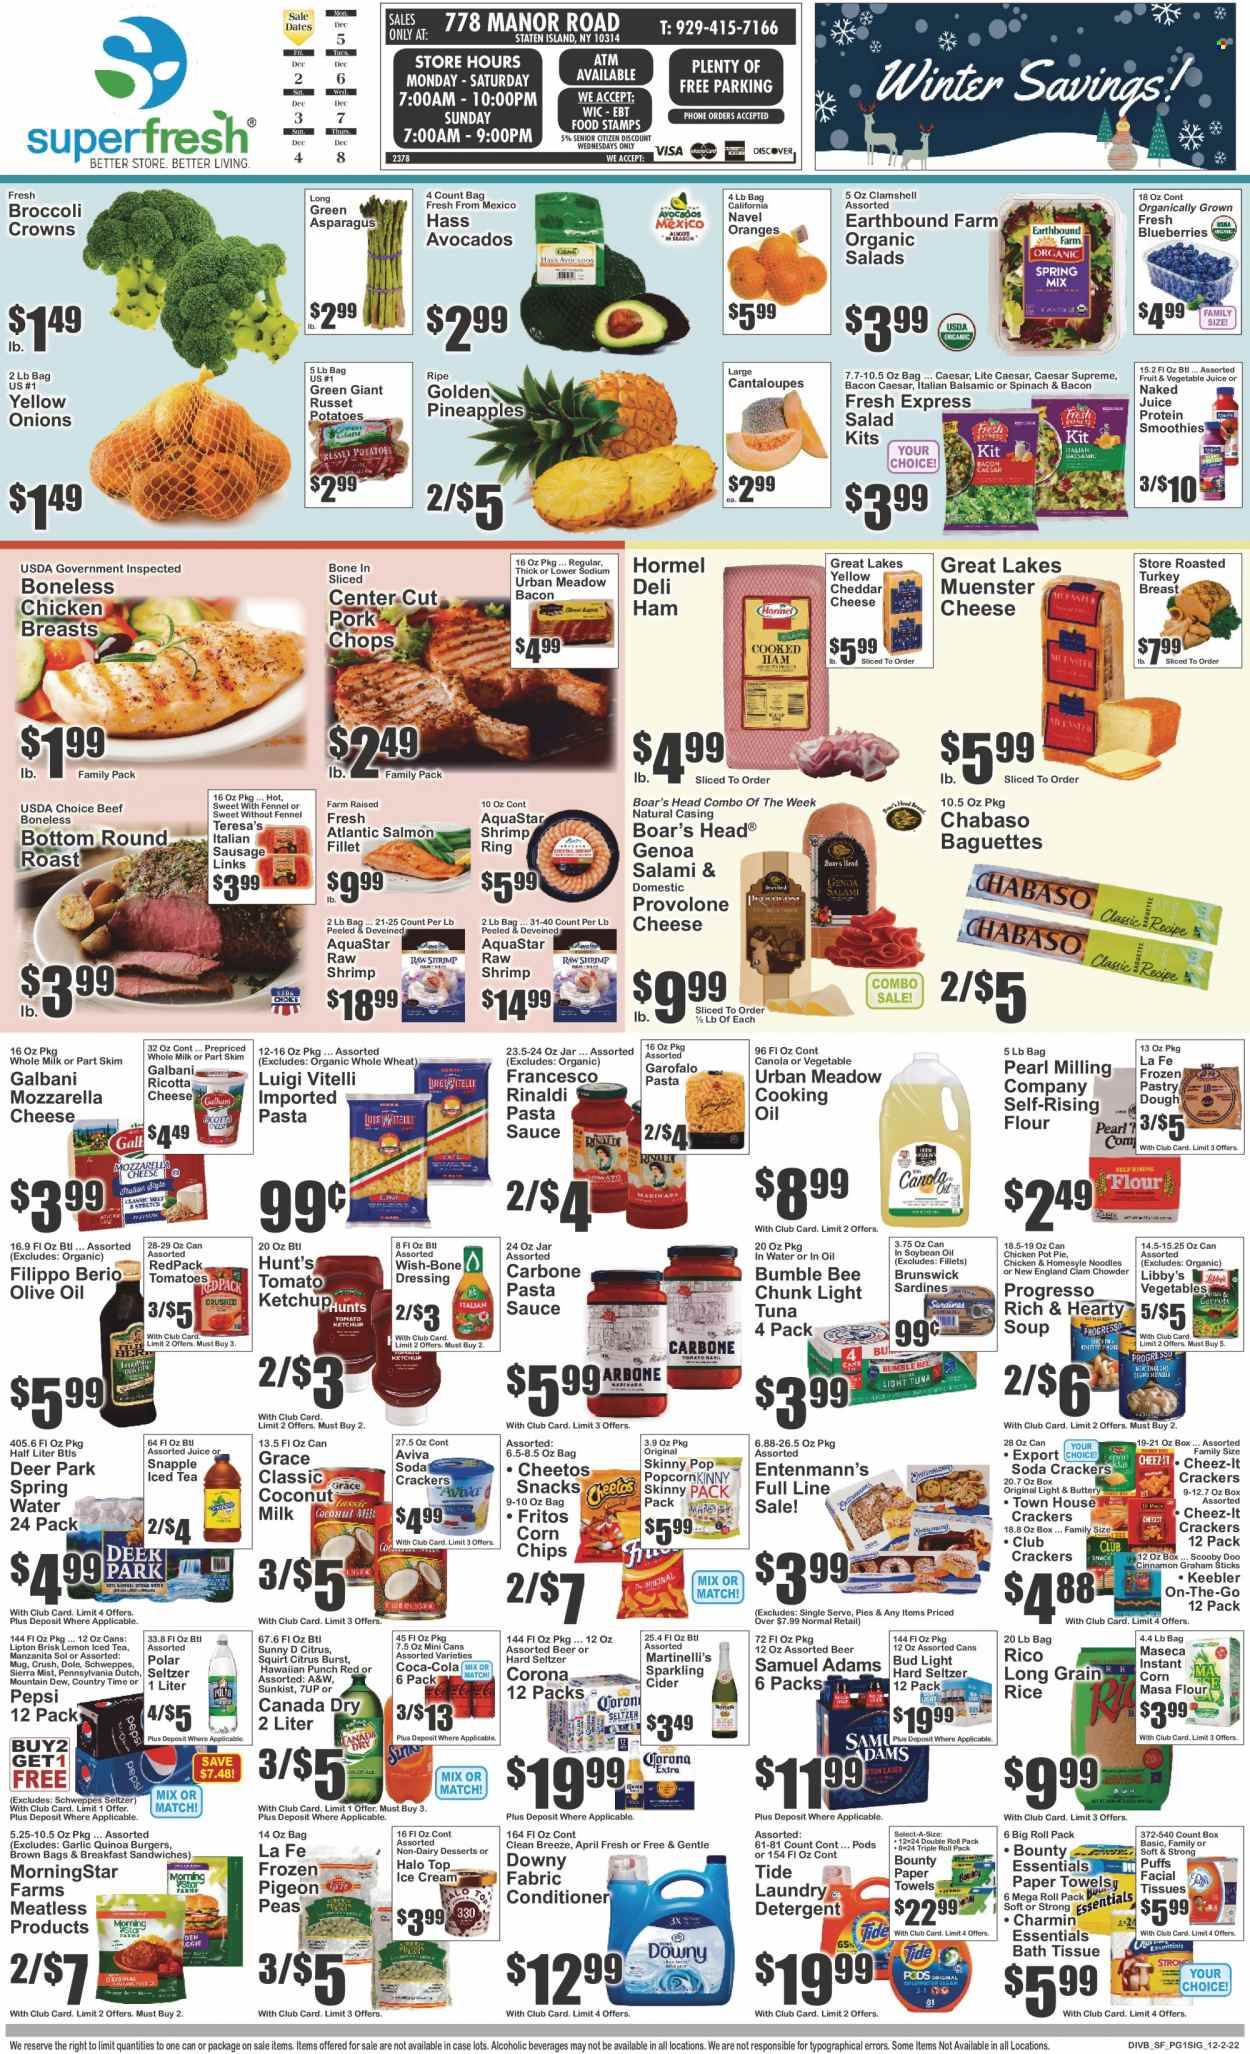 thumbnail - Super Fresh Flyer - 12/02/2022 - 12/08/2022 - Sales products - baguette, pie, pot pie, puffs, Entenmann's, asparagus, cantaloupe, garlic, russet potatoes, tomatoes, potatoes, peas, salad, Dole, avocado, blueberries, pineapple, oranges, salmon, salmon fillet, sardines, tuna, shrimps, pasta sauce, soup, hamburger, Bumble Bee, sauce, noodles, Progresso, MorningStar Farms, Hormel, salami, ham, sausage, italian sausage, mozzarella, ricotta, Münster cheese, Galbani, Provolone, ice cream, snack, Bounty, crackers, Keebler, Fritos, Cheetos, corn chips, popcorn, Cheez-It, Skinny Pop, flour, coconut milk, light tuna, clam chowder, quinoa, rice, toor dal, long grain rice, fennel, cinnamon, ketchup, dressing, soya oil, olive oil, cooking oil, Canada Dry, Coca-Cola, Mountain Dew, Schweppes, Pepsi, juice, Lipton, ice tea, 7UP, Snapple, A&W, Sierra Mist, vegetable juice, Country Time, smoothie, spring water, soda, sparkling cider, sparkling wine, Hard Seltzer, cider, beer, Bud Light, Corona Extra, chicken breasts, beef meat, round roast, pork chops, pork meat, bath tissue, Plenty, kitchen towels, paper towels, Charmin, detergent, Tide, laundry detergent, Downy Laundry, facial tissues, navel oranges. Page 1.